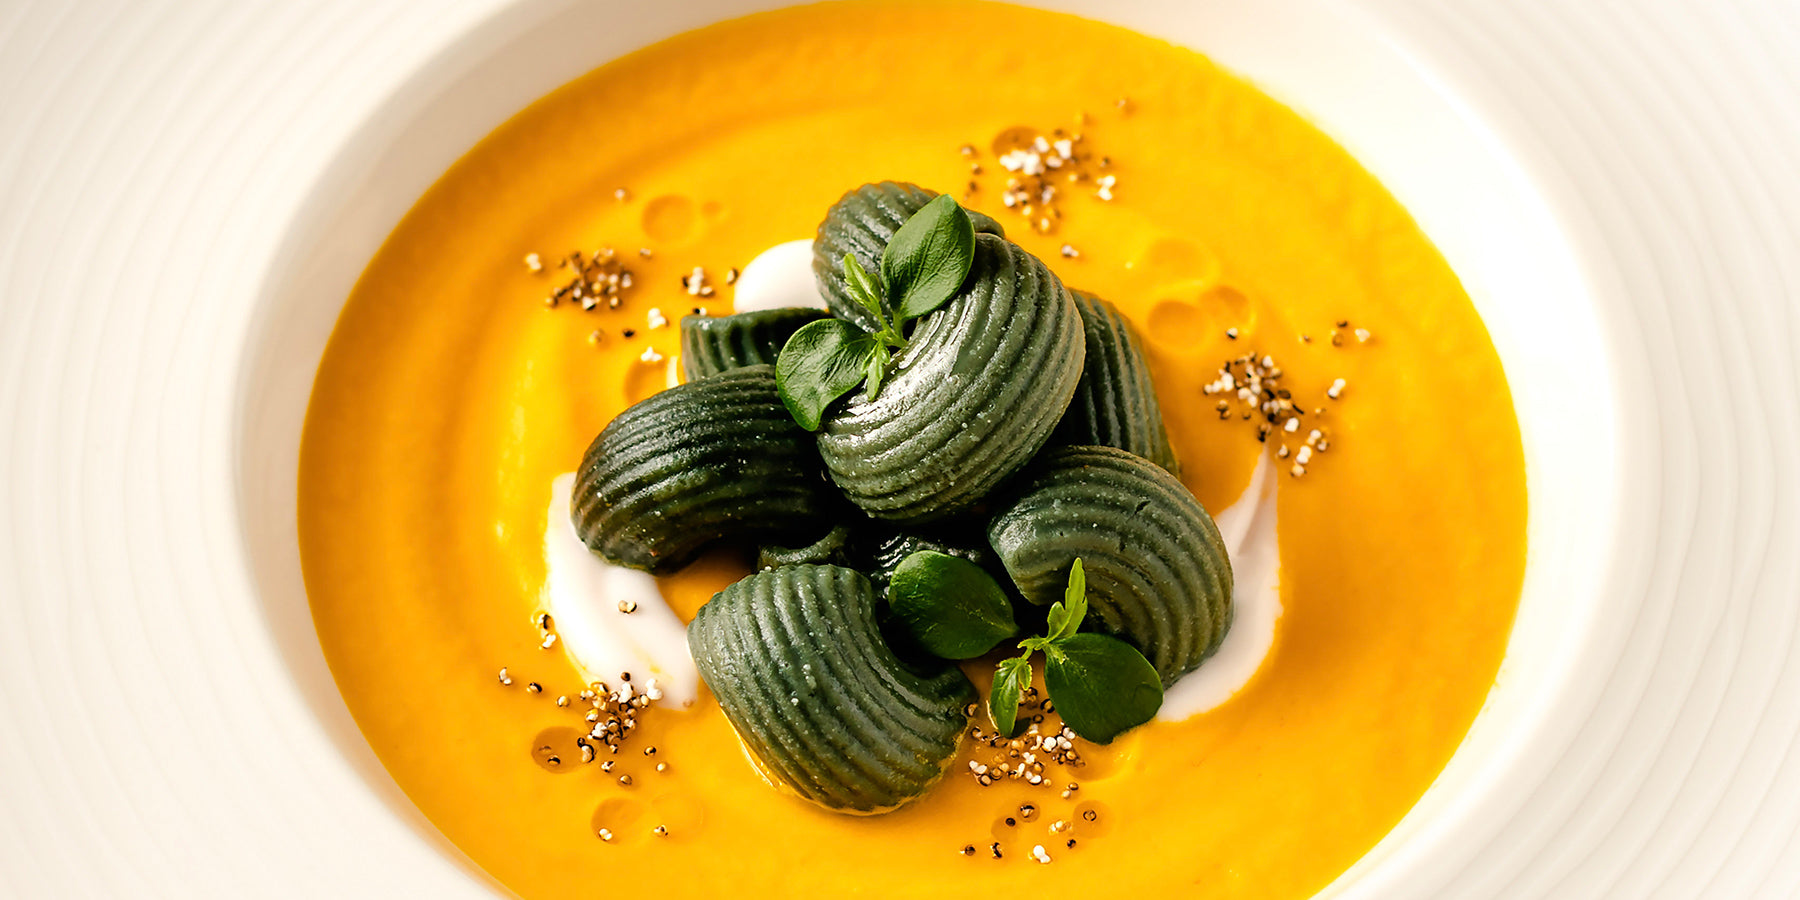 Creamy Carrot Soup with Spirulina Pipe Rigate and Puffed Amaranth